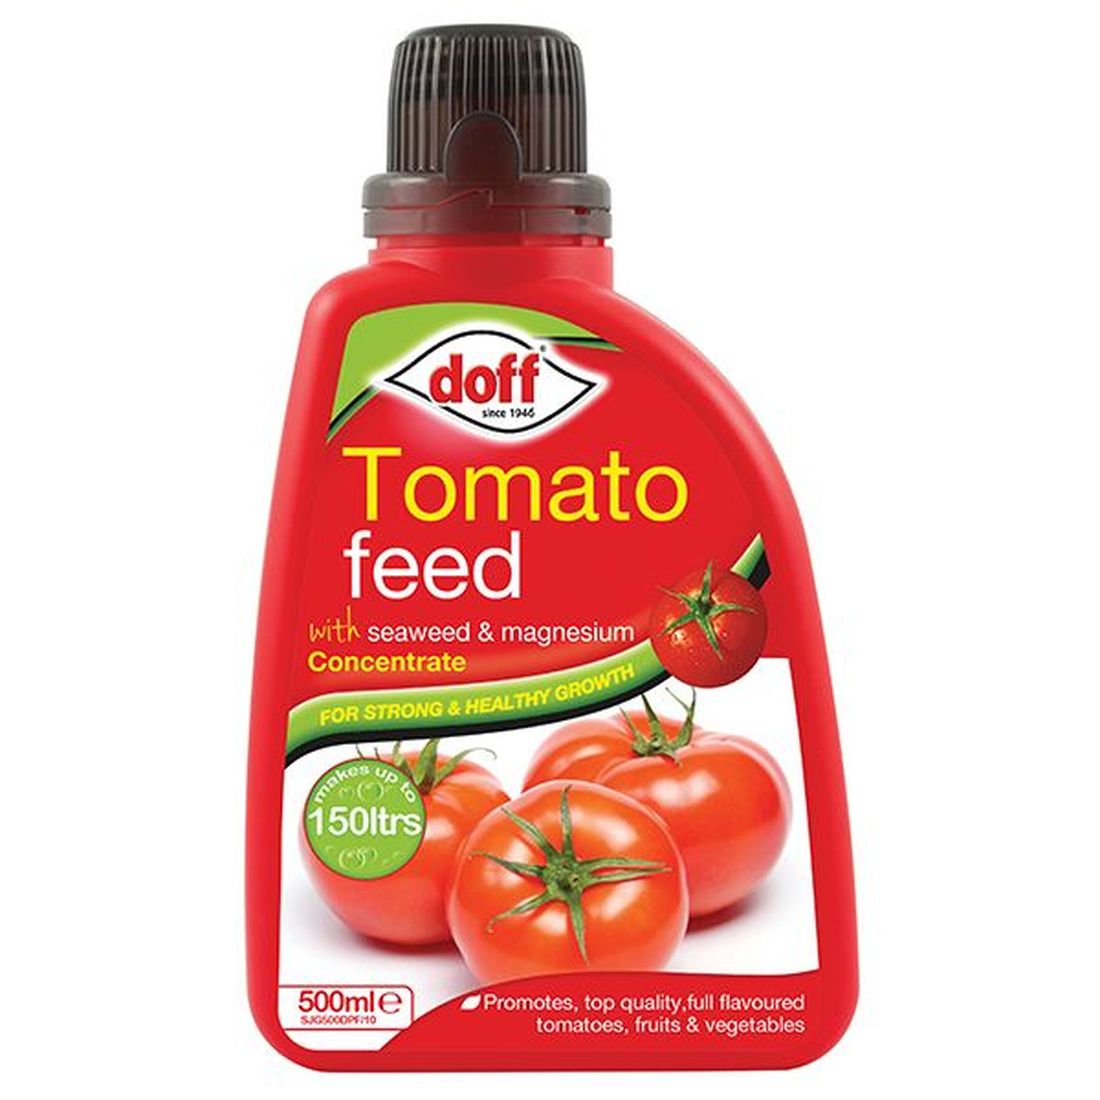 DOFF Tomato Feed Concentrate 500ml     